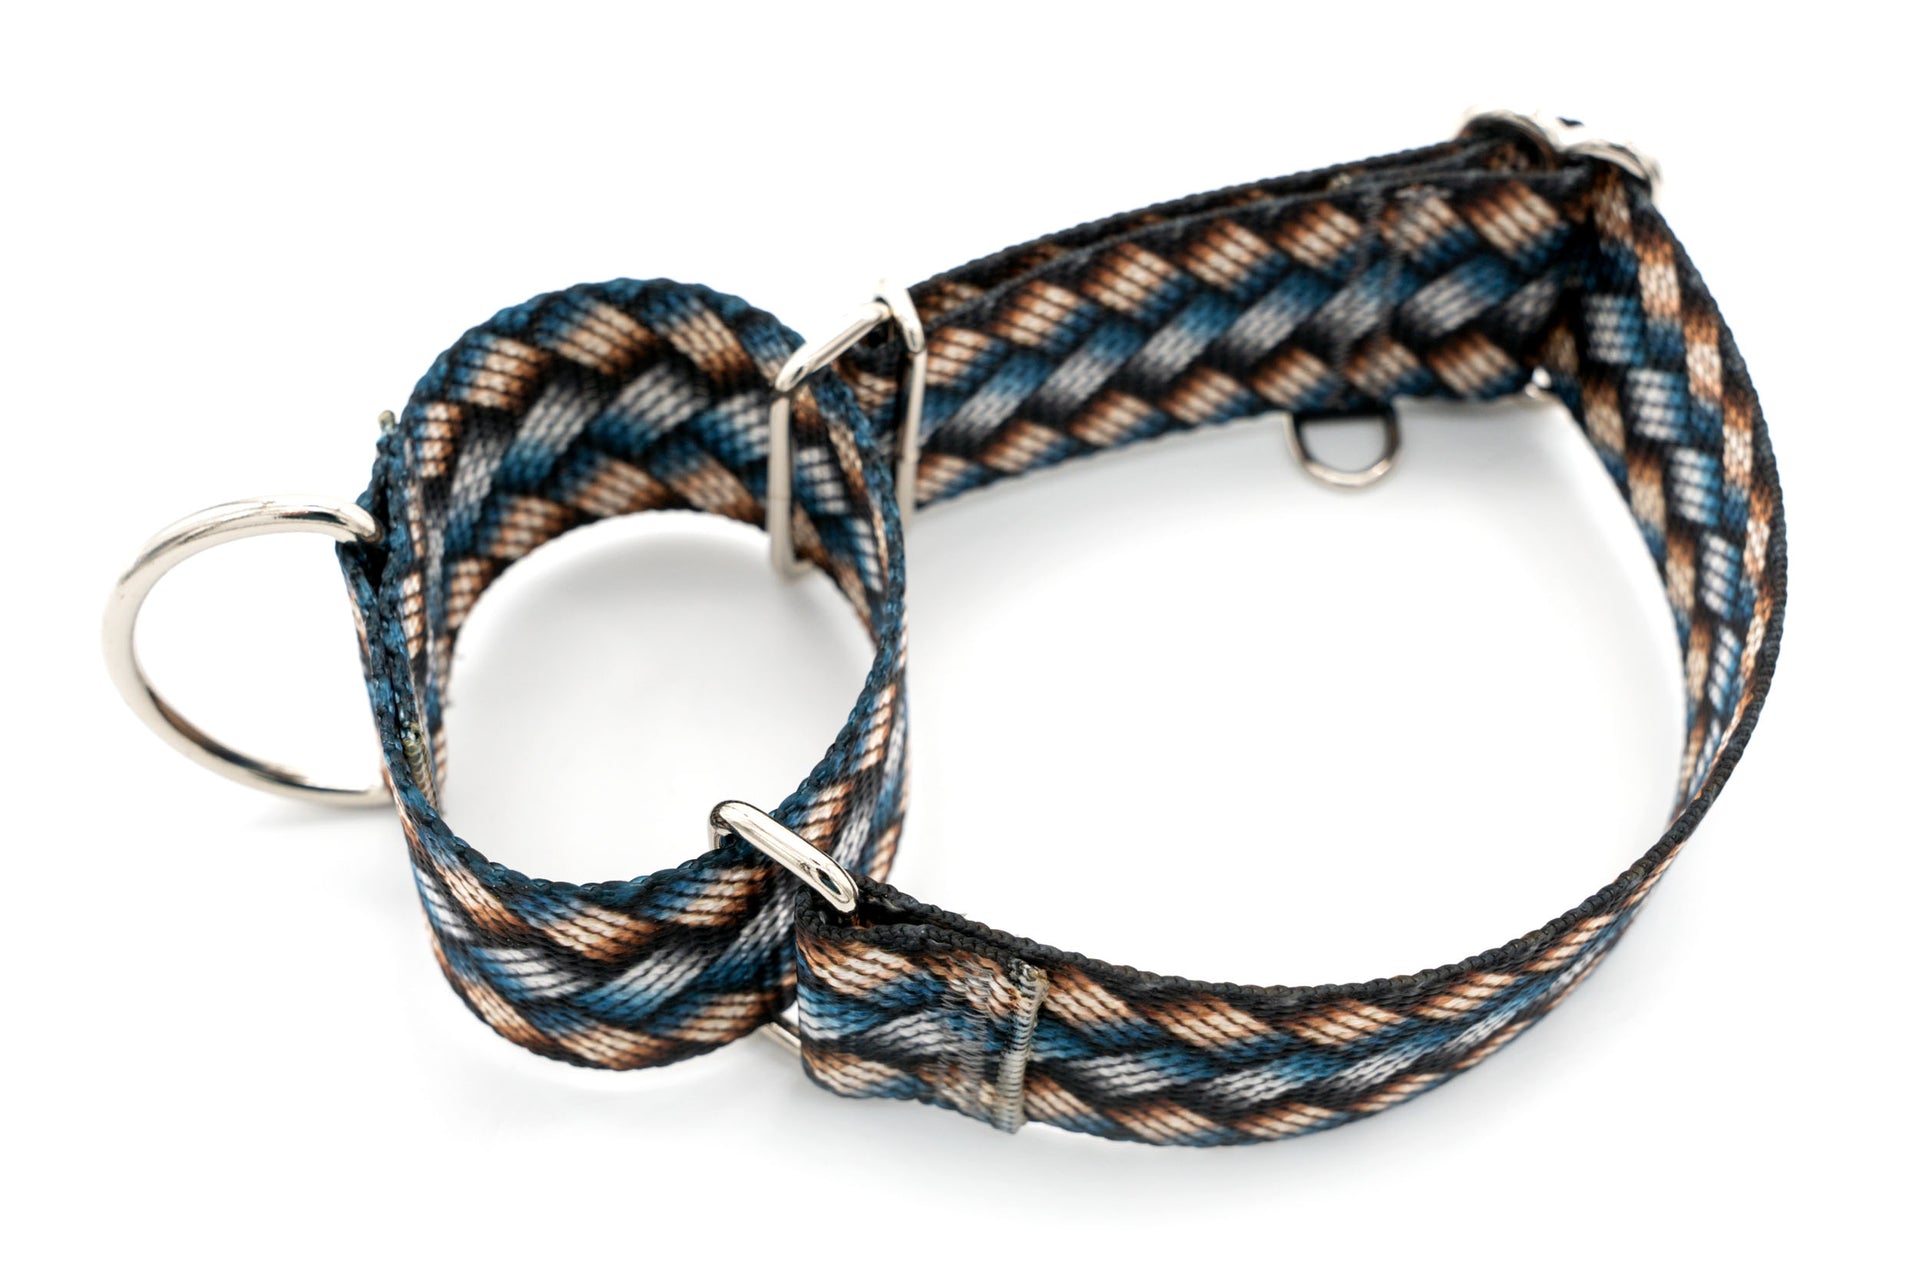 Patterned Webbing Martingale Dog Collar - 20 prints, made in the USA! - Fox Valley Pet Wear